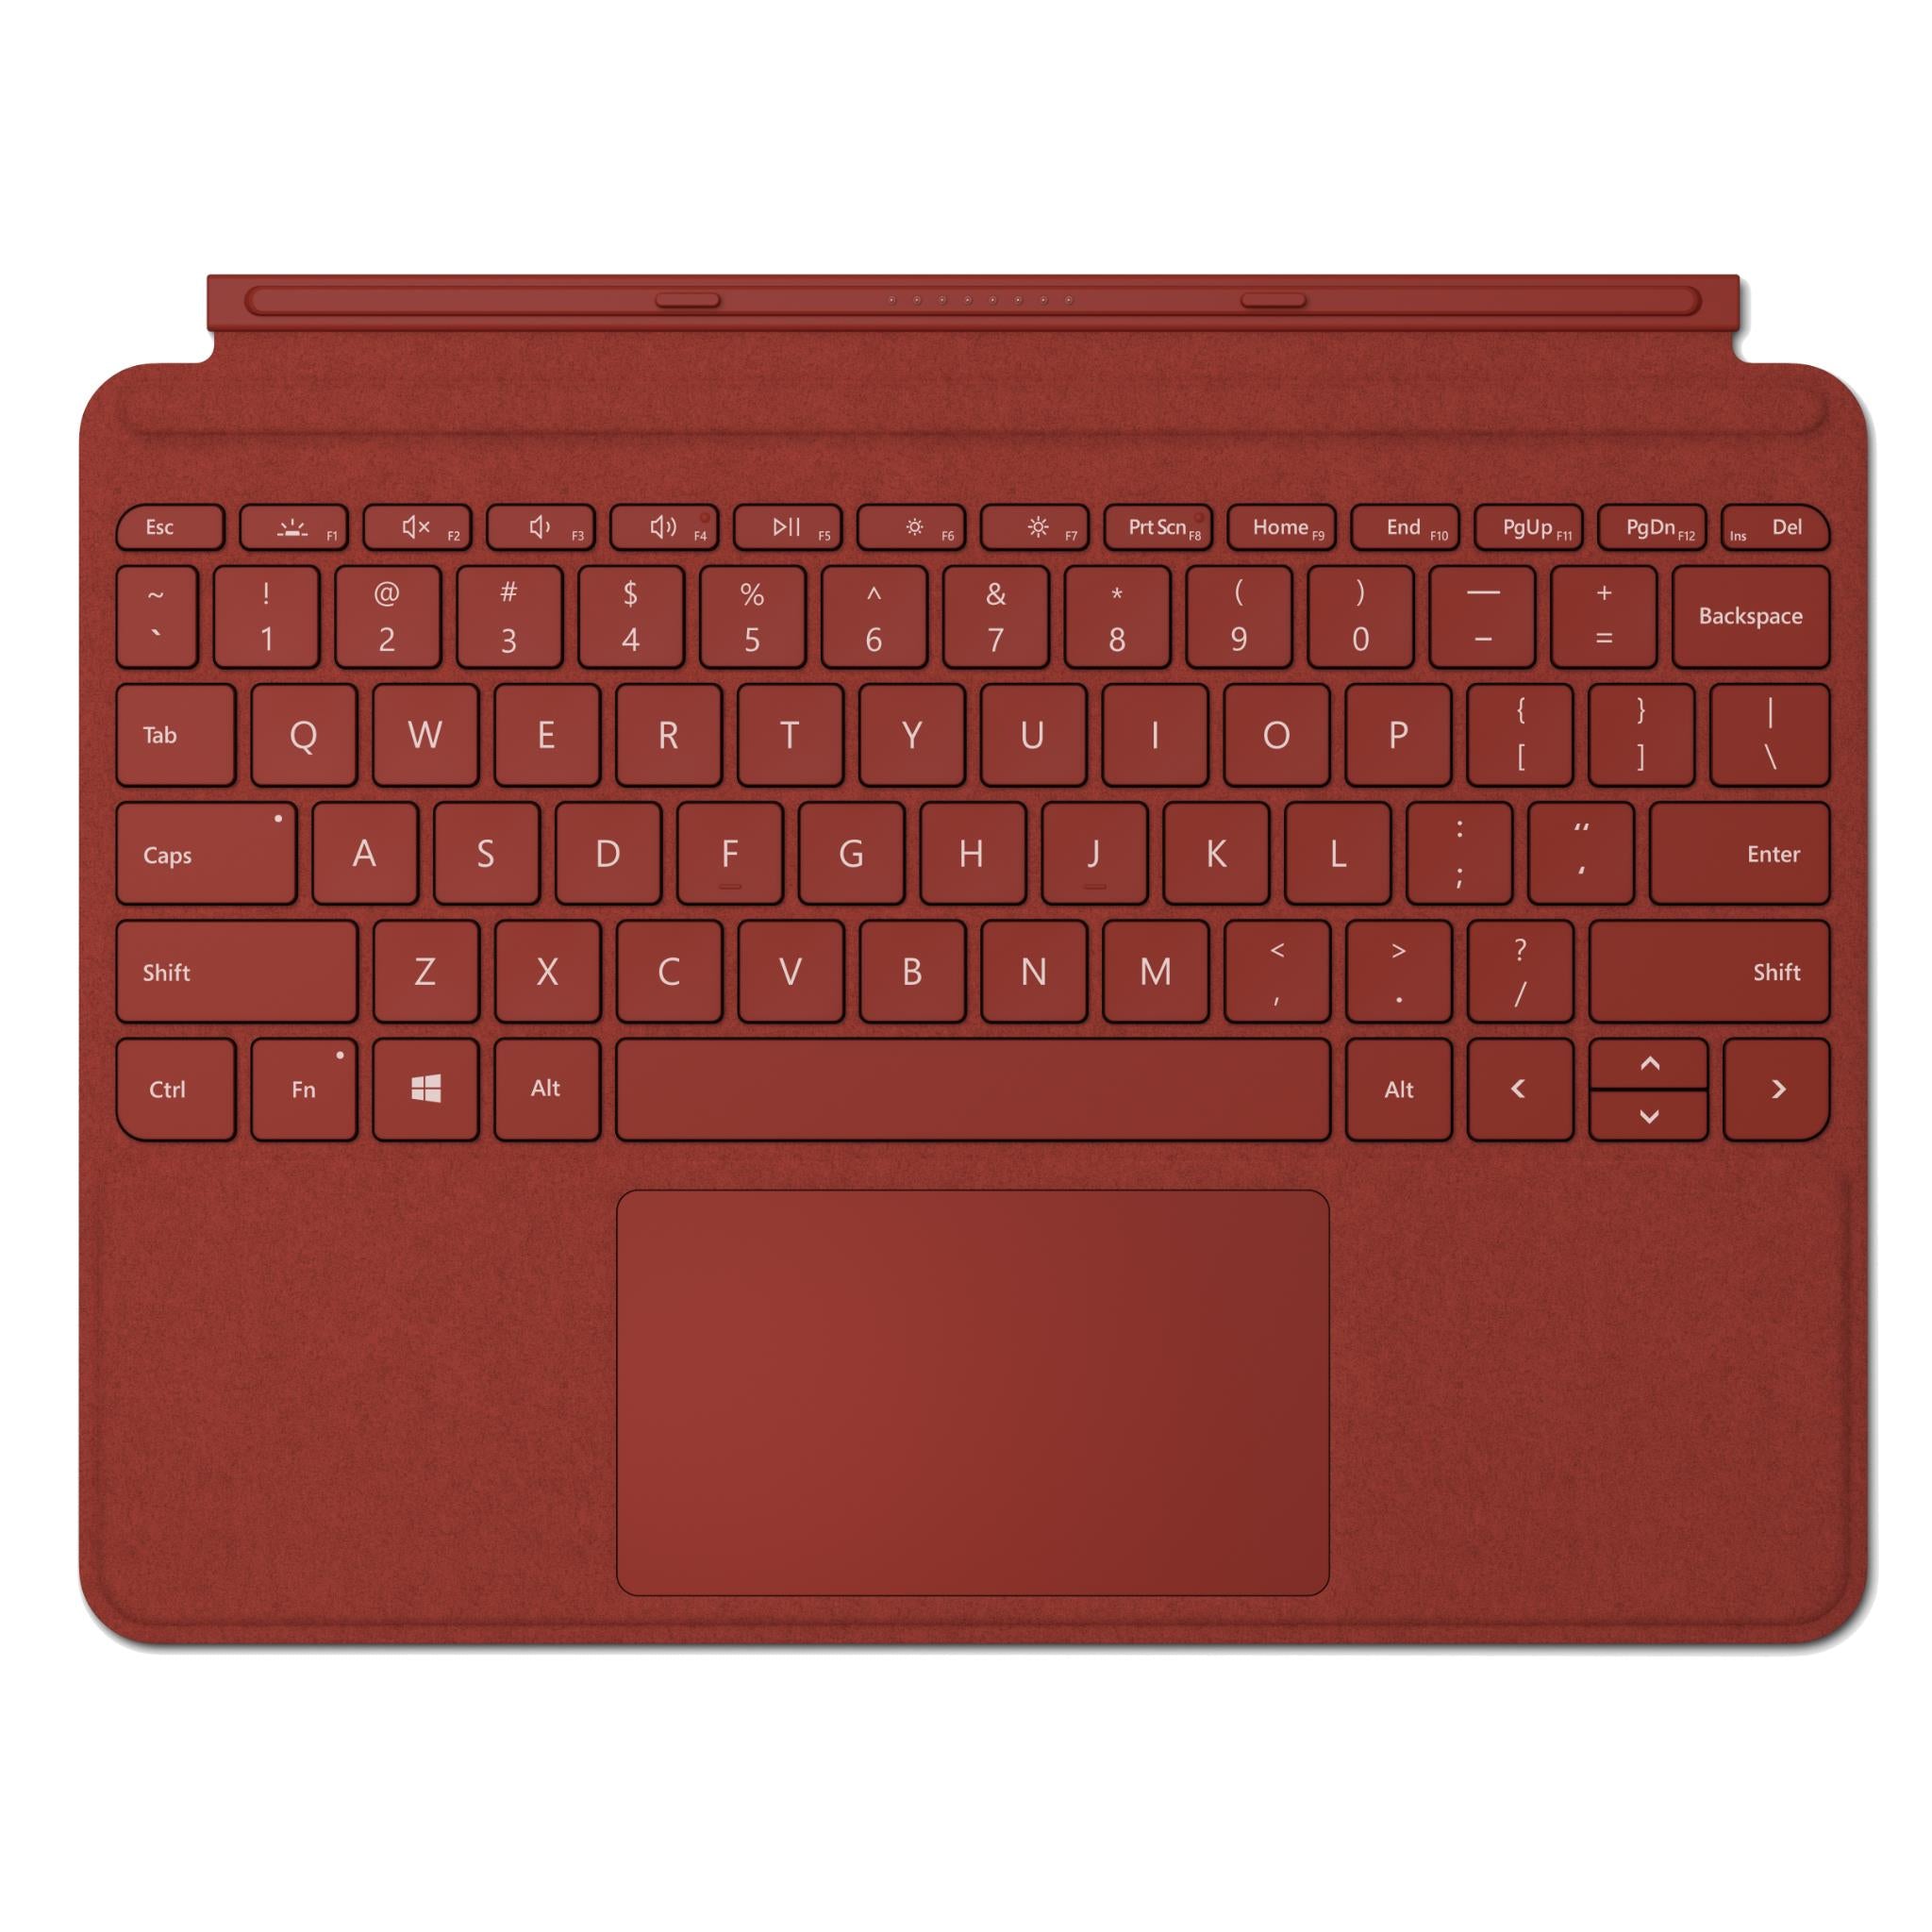 Surface Go 128gb LTE+TypeCover+Pen - タブレット